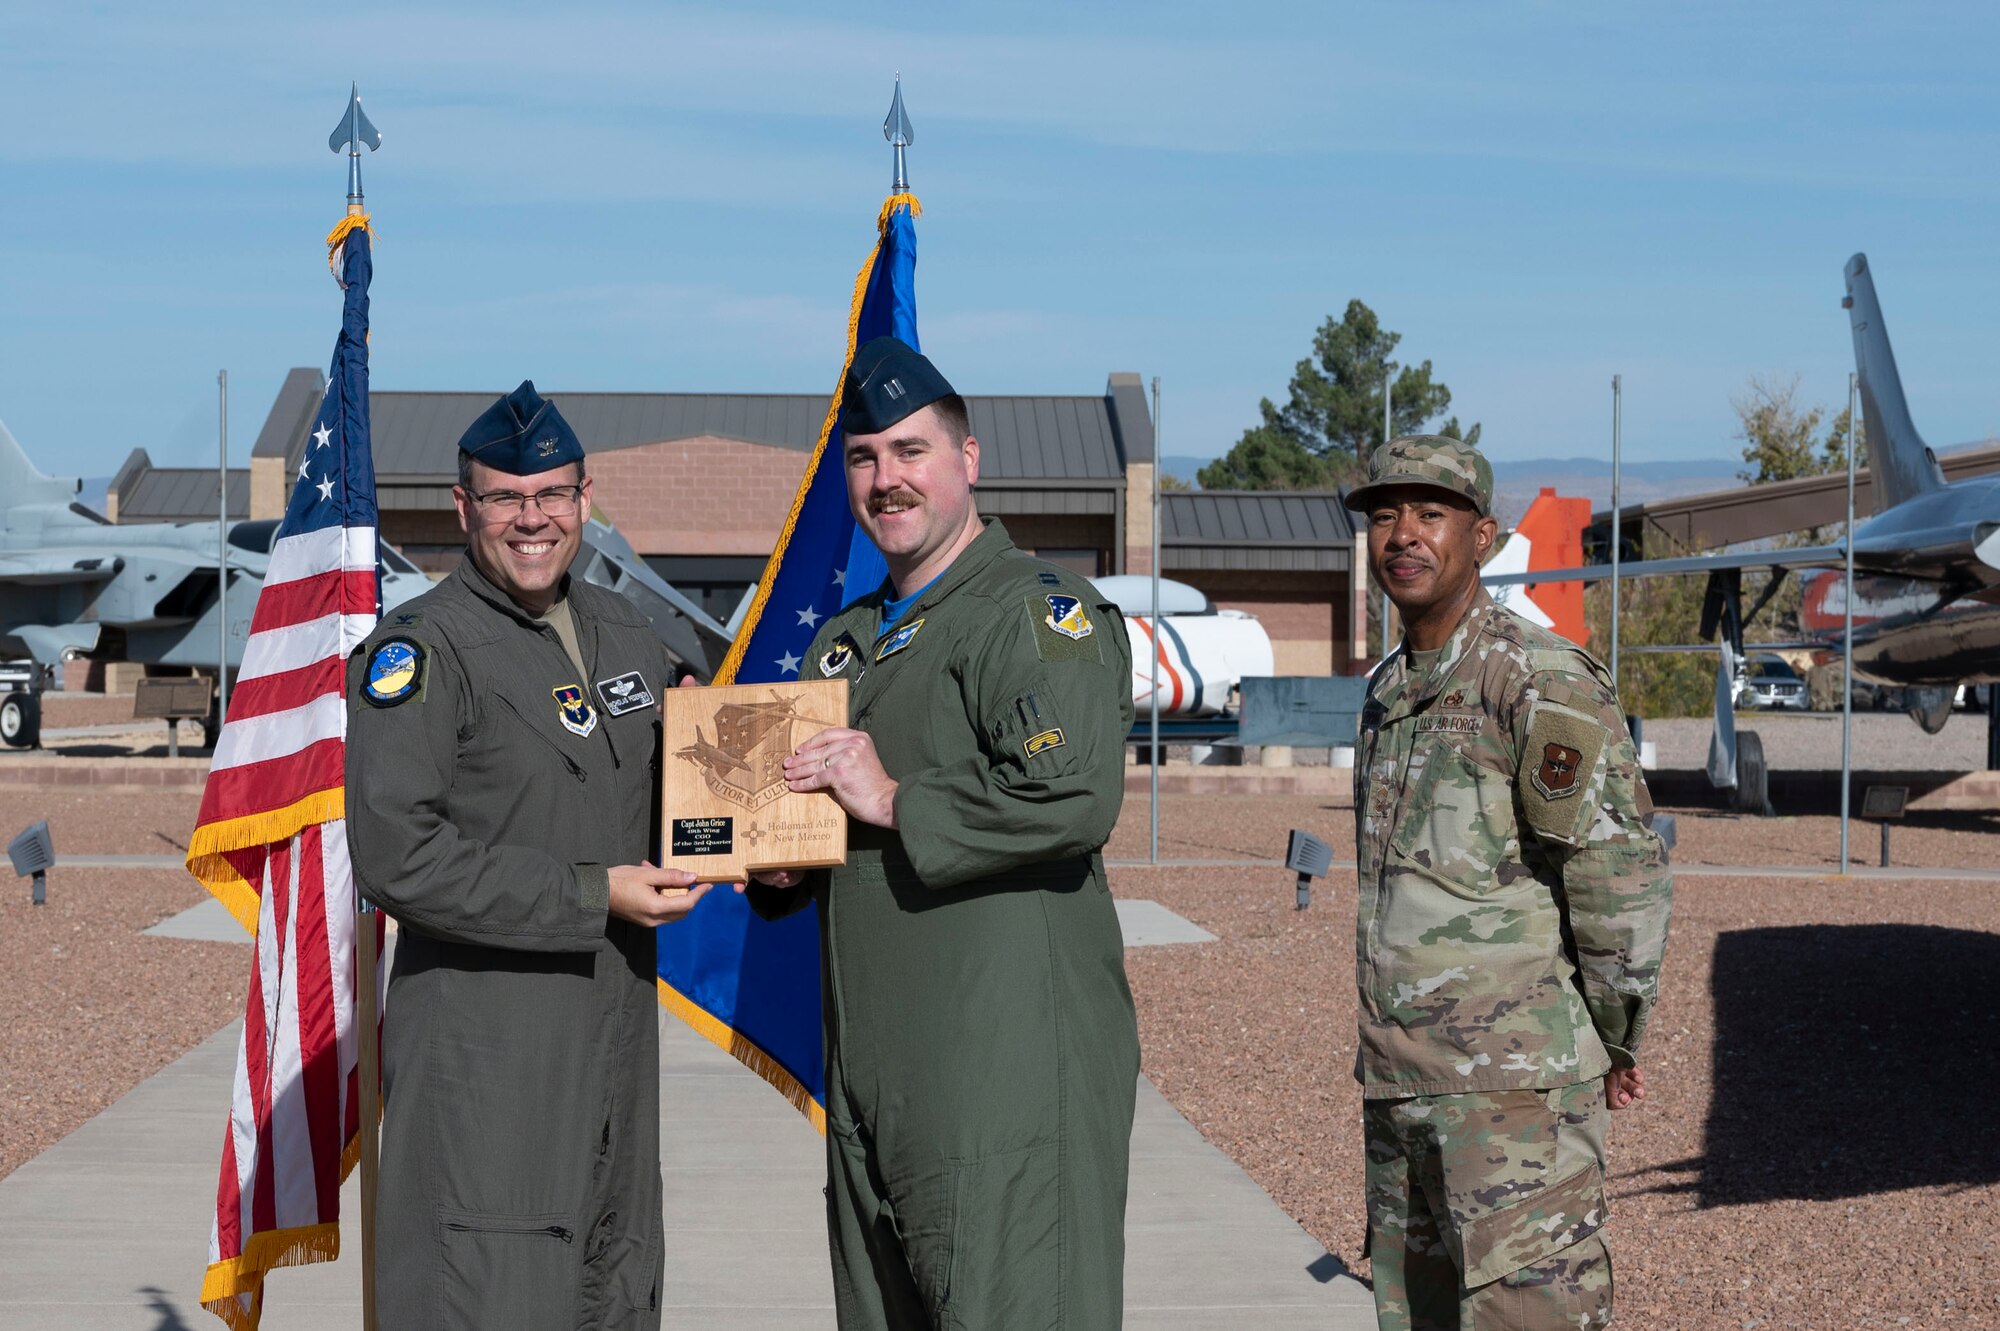 Capt. John Grice, quarterly award winner, accepts the Company Grade Officer of the quarter award during the 49th Wing’s 3rd quarter award ceremony, Nov. 19, 2021, on Holloman Air Force Base, New Mexico. Quarterly award winners were selected based on their technical expertise, demonstration of leadership and job performance. (U.S. Air Force photo by Airman 1st Class Antonio Salfran)